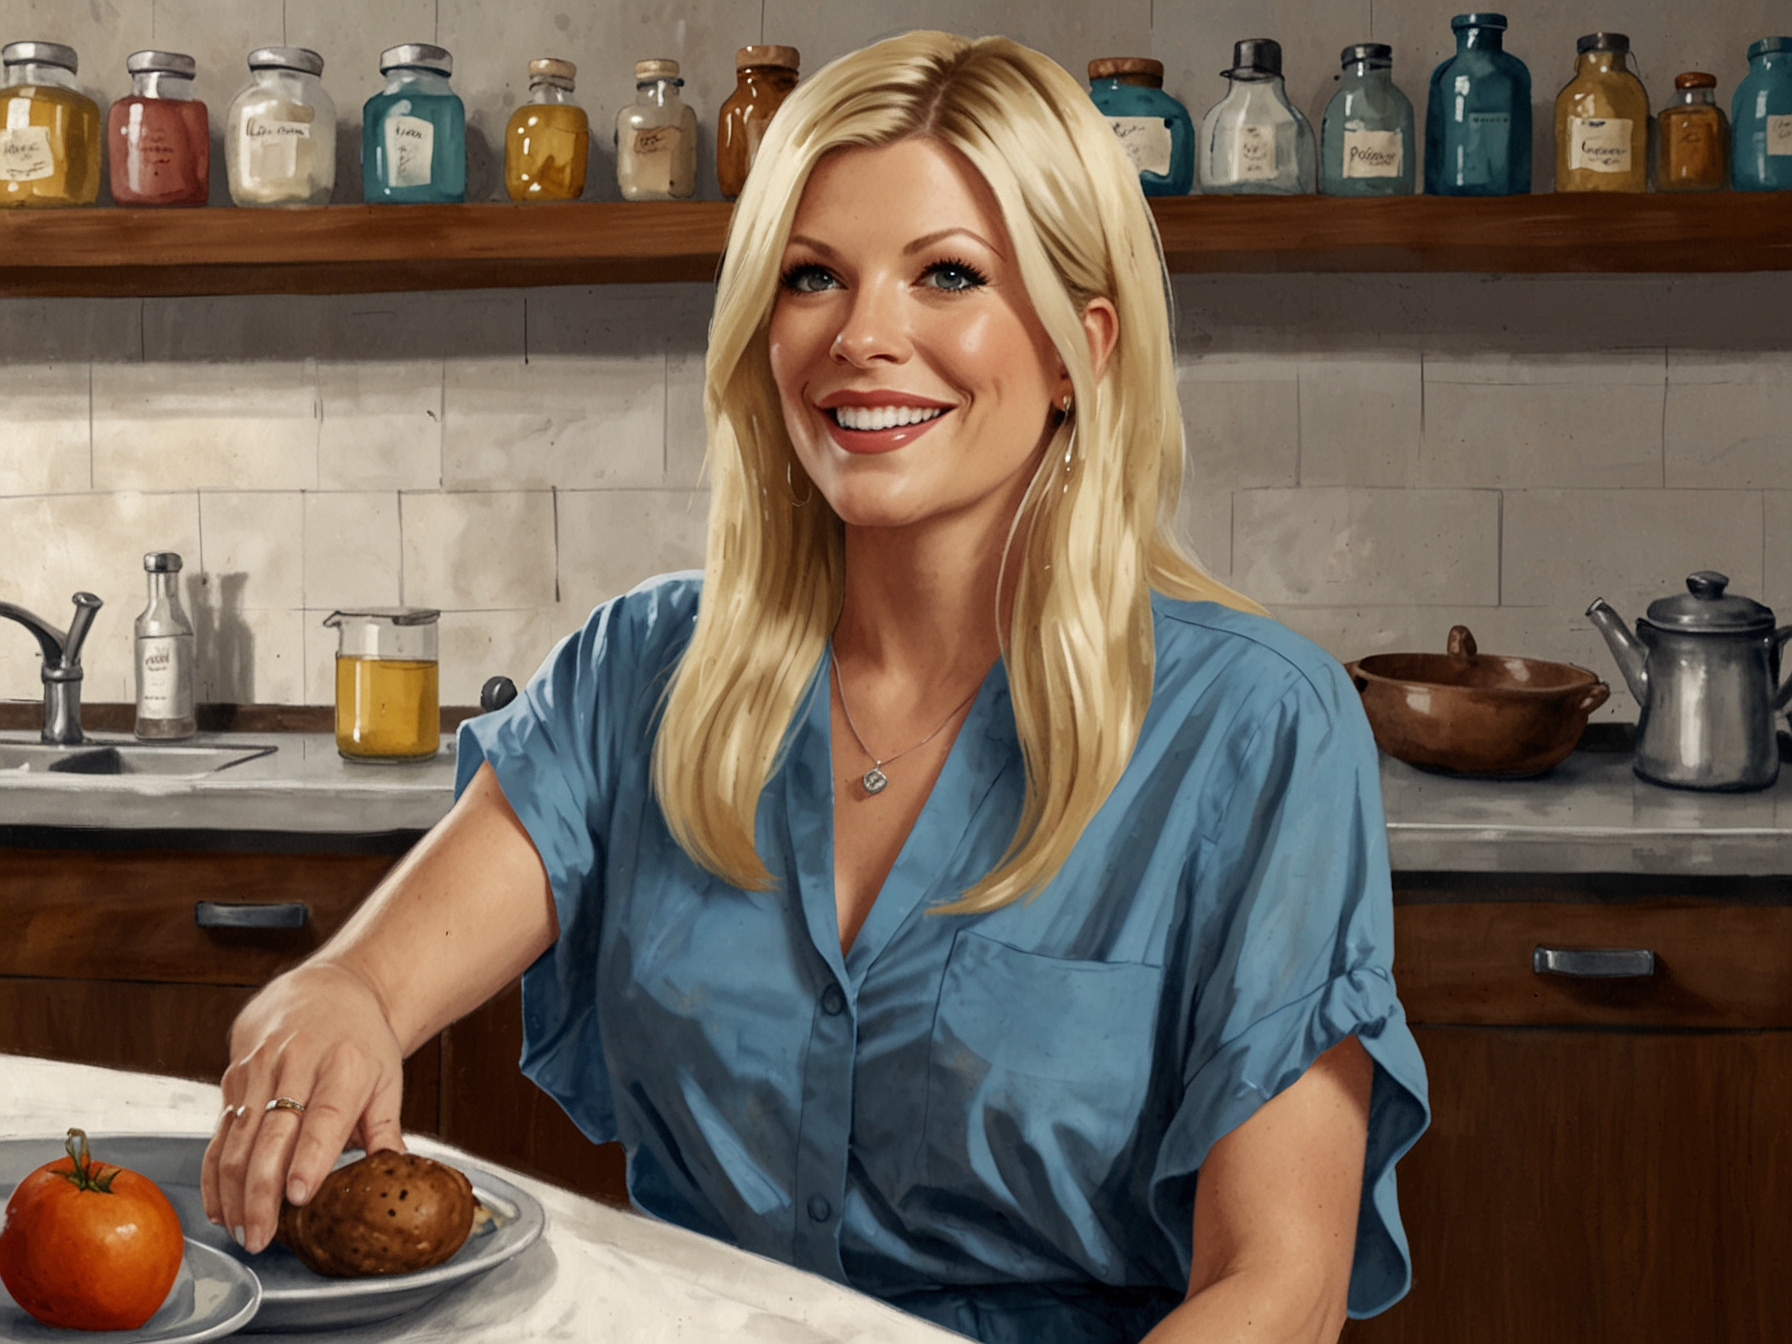 Tori Spelling in a candid moment, sharing her experience and reasons behind consuming her placenta with truffle oil, reflecting her personal journey towards holistic postpartum care.